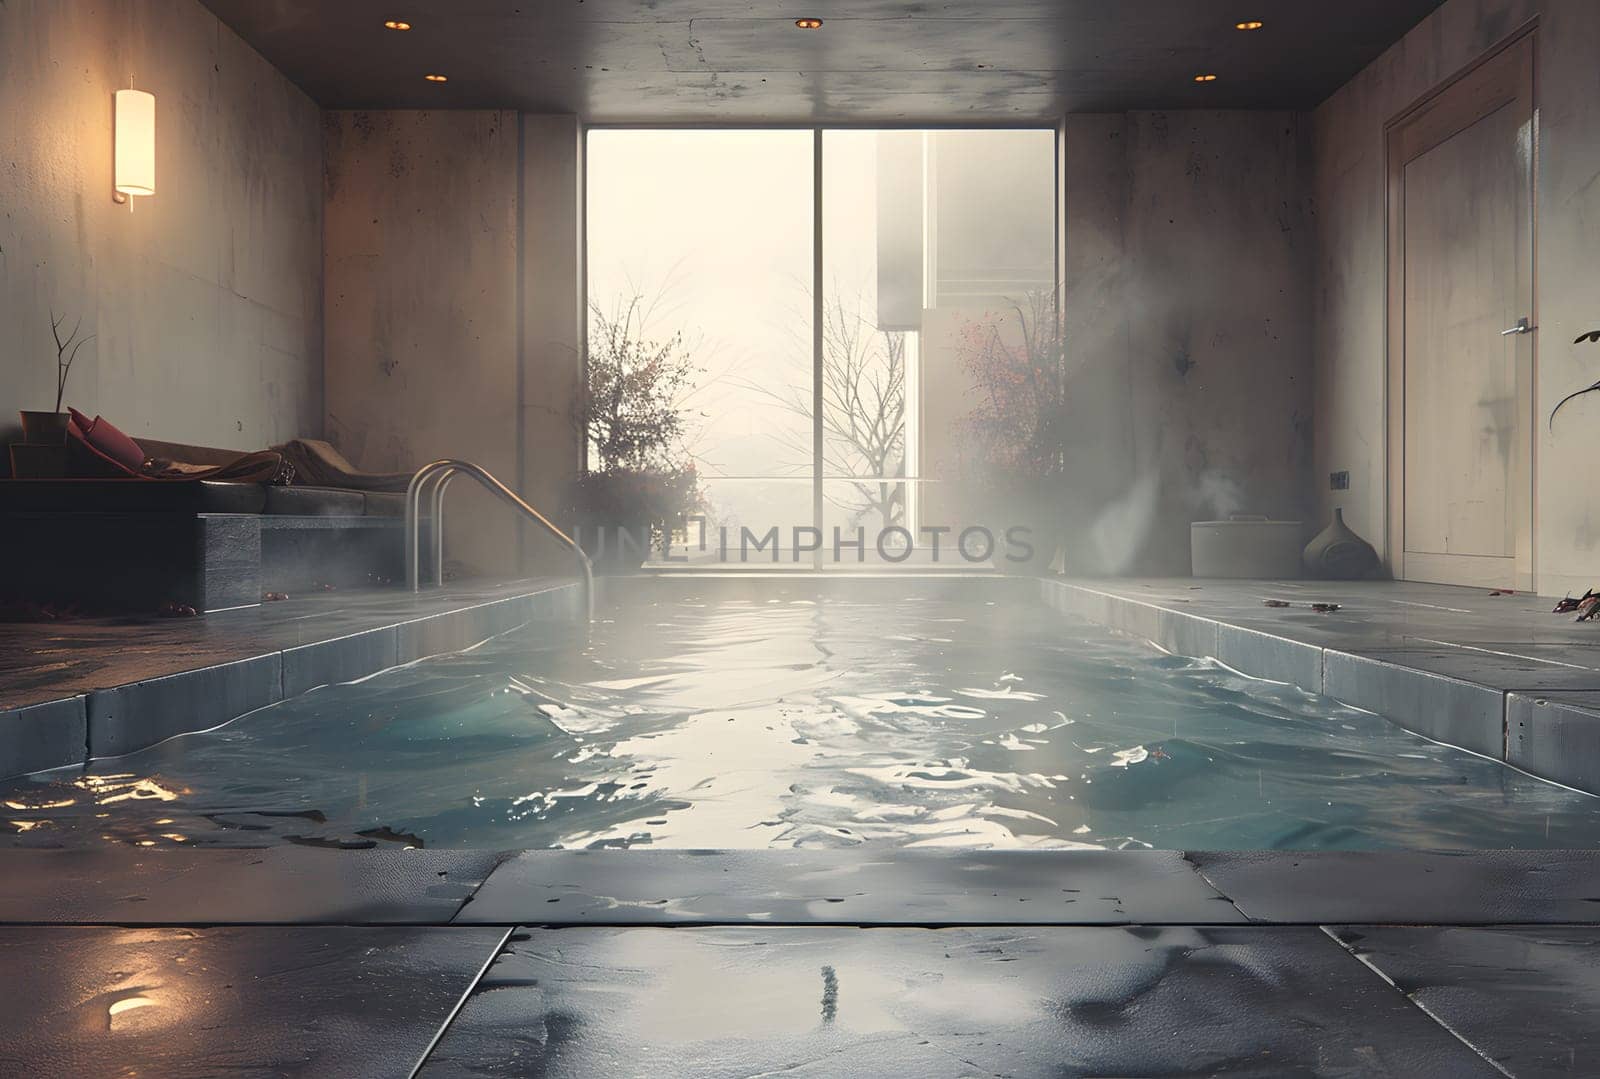 A waterfilled indoor swimming pool inside a building with steam rising from the surface, surrounded by glass panels and hardwood flooring